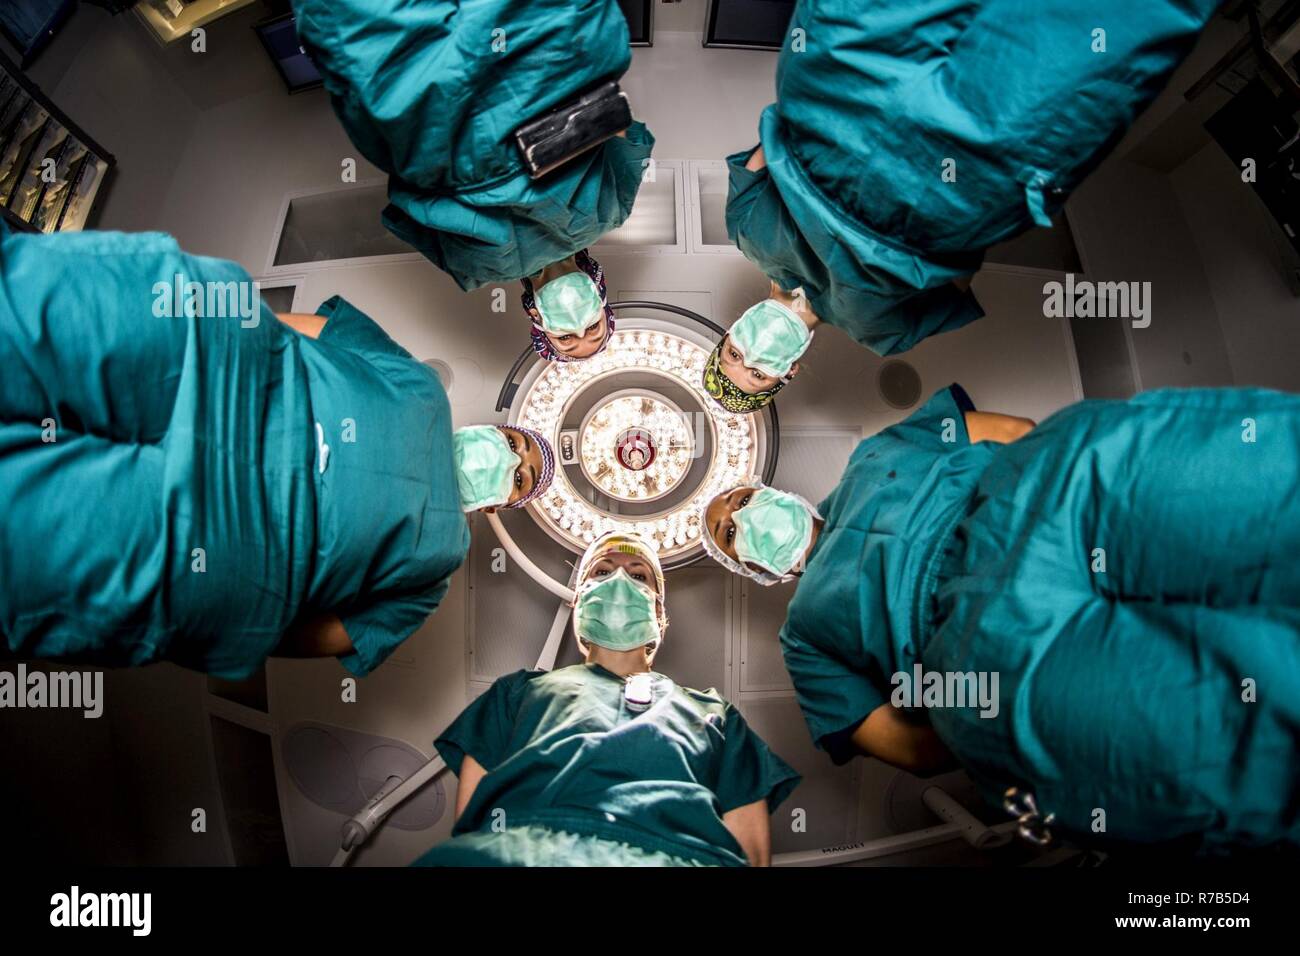 FORT BELVOIR, Va. (April 12, 2017)  Female surgeons of the Belvoir Hospital take a moment to recreate a recent image from the New Yorker magazine as a display of pride and diversity. Stock Photo